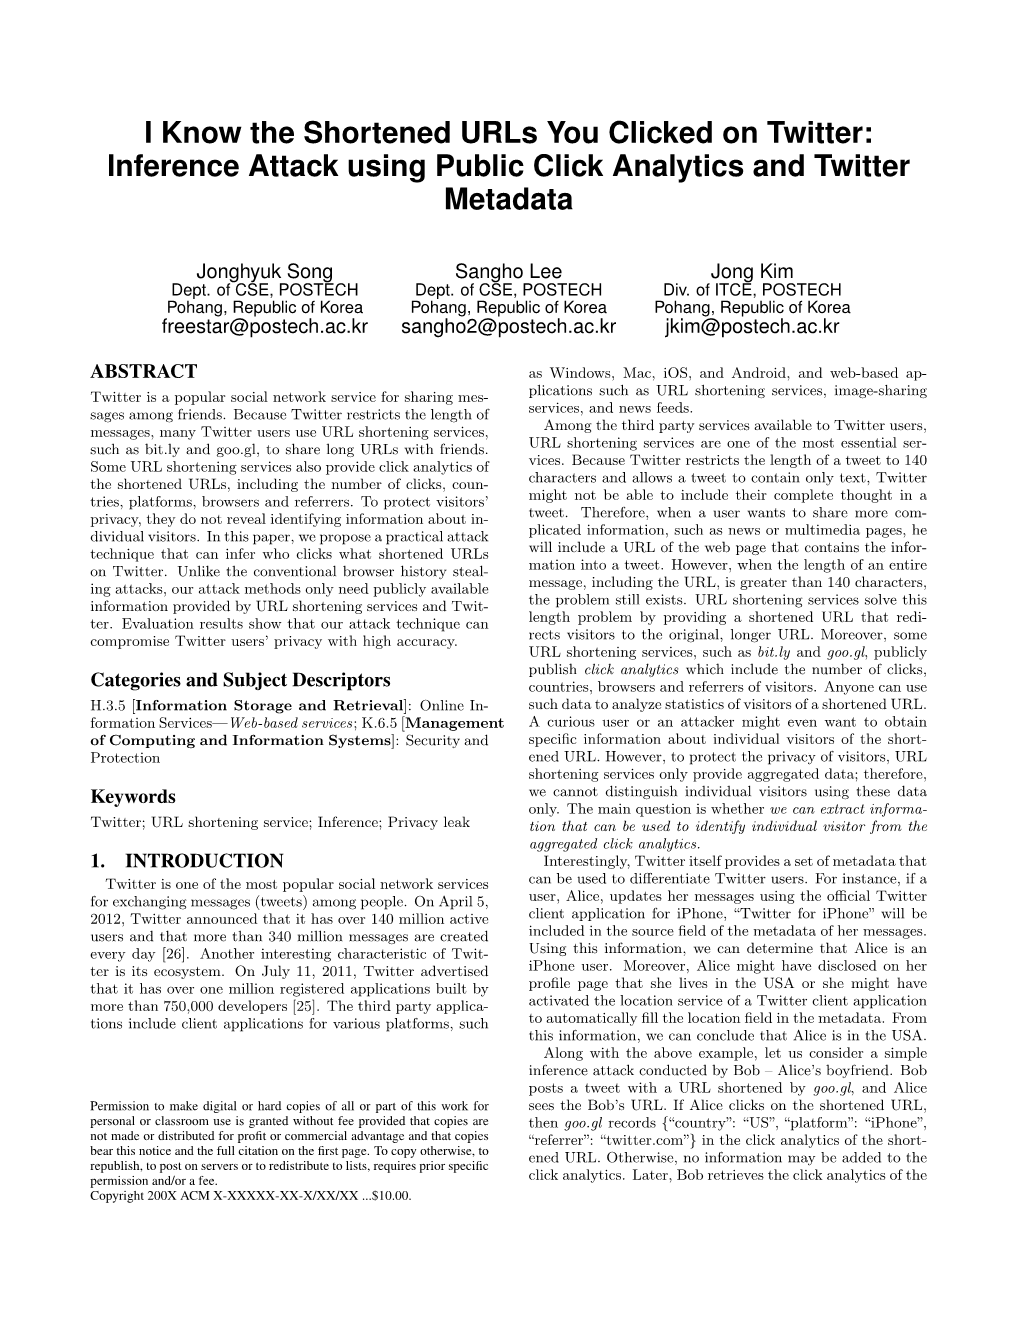 I Know the Shortened Urls You Clicked on Twitter: Inference Attack Using Public Click Analytics and Twitter Metadata